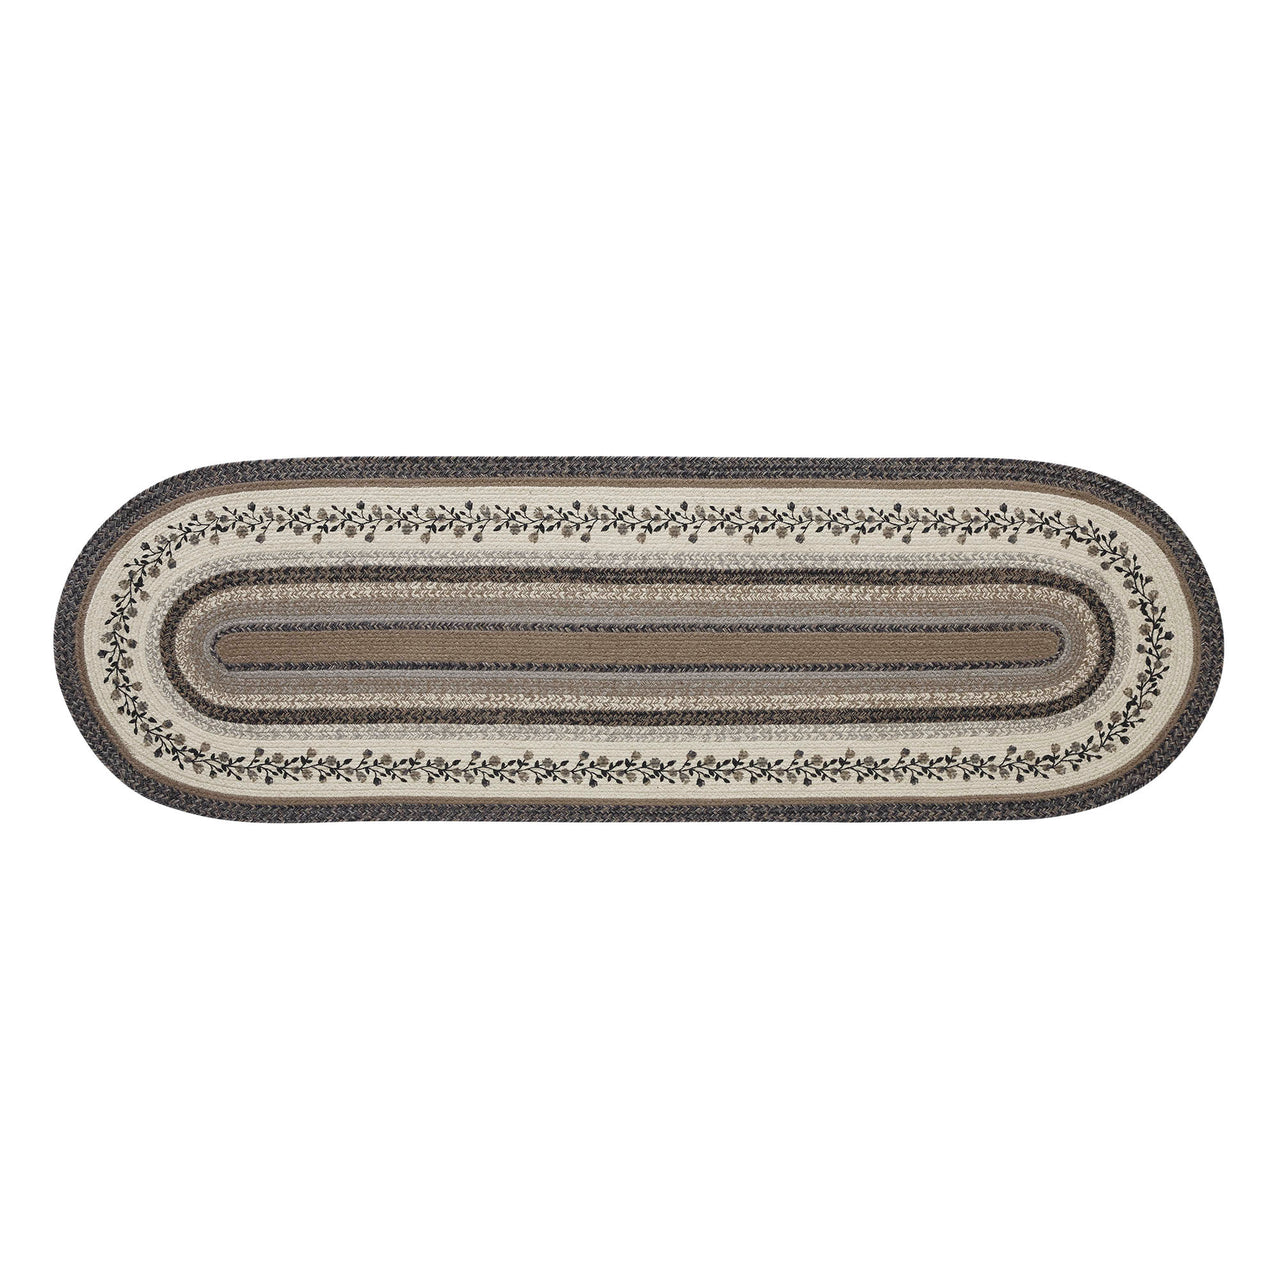 Floral Vine Jute Oval Braided Runner Rug with Rug Pad 24"x78"(2'x6.5') VHC Brands